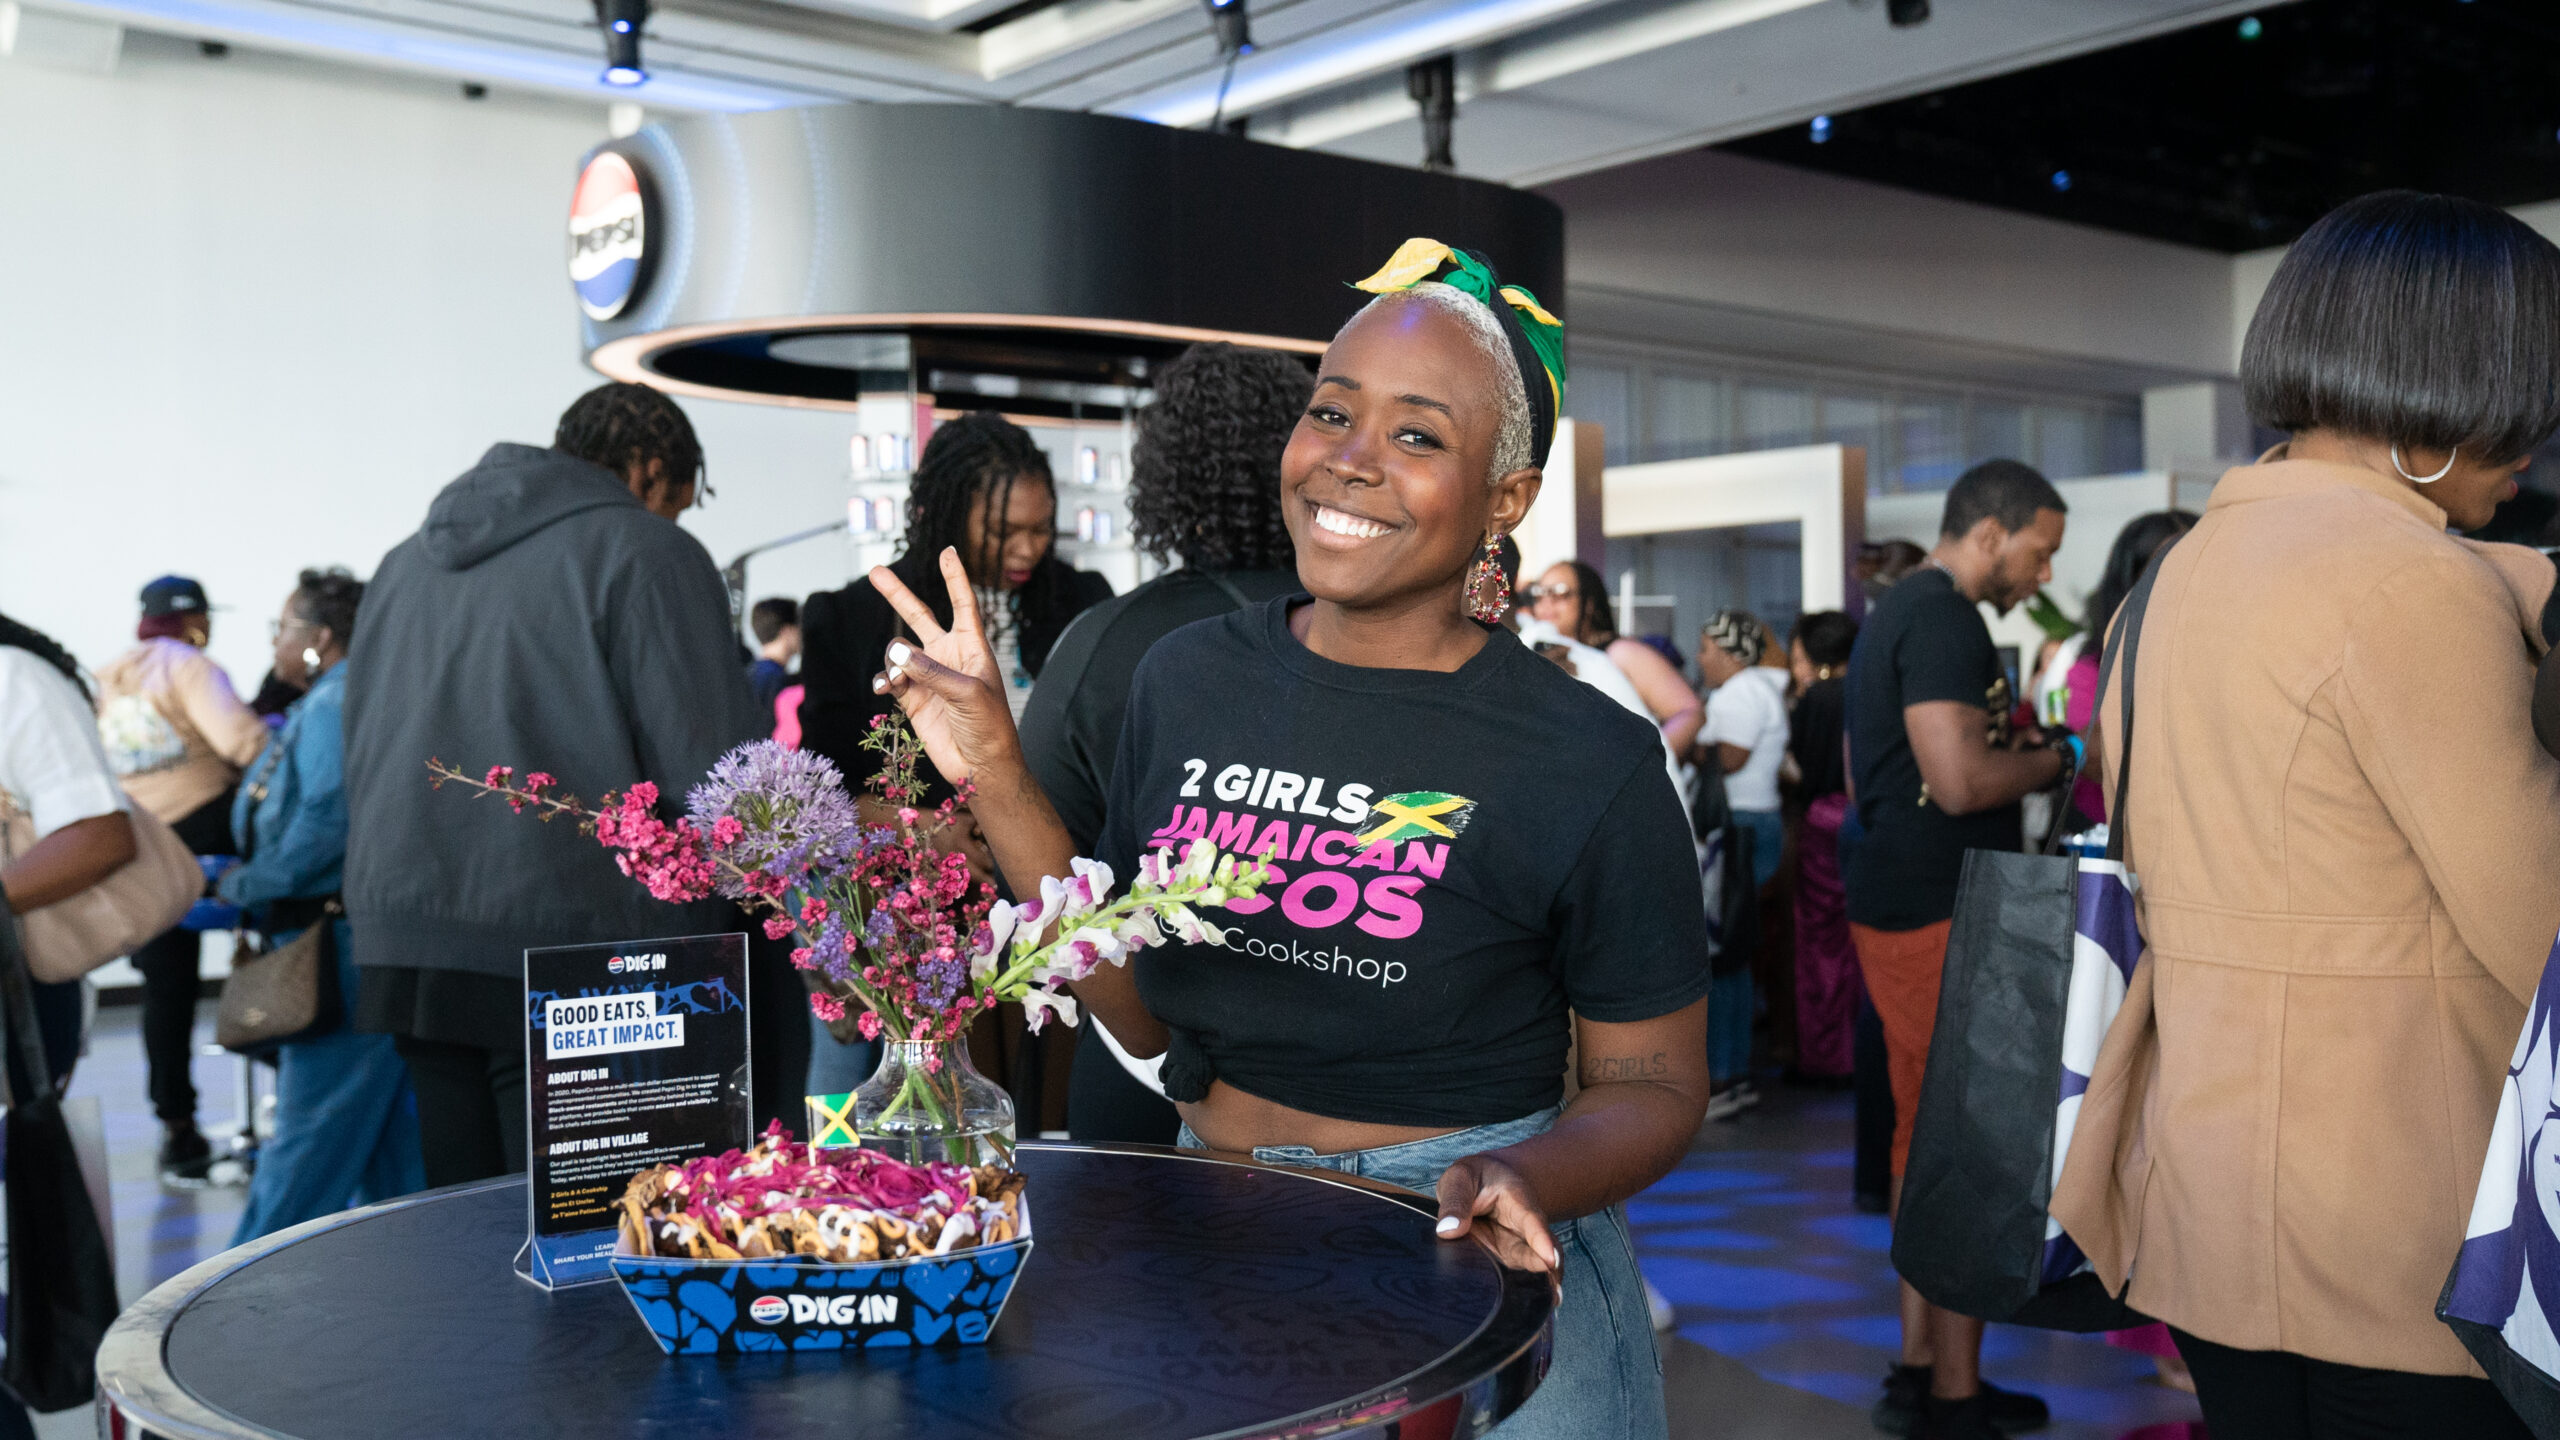 How This Mompreneur And Her Daughter Landed At A Mary J. Blige Festival After Frequently Getting 'Kicked Out' Of Other Vending Opportunities For Their Restaurant